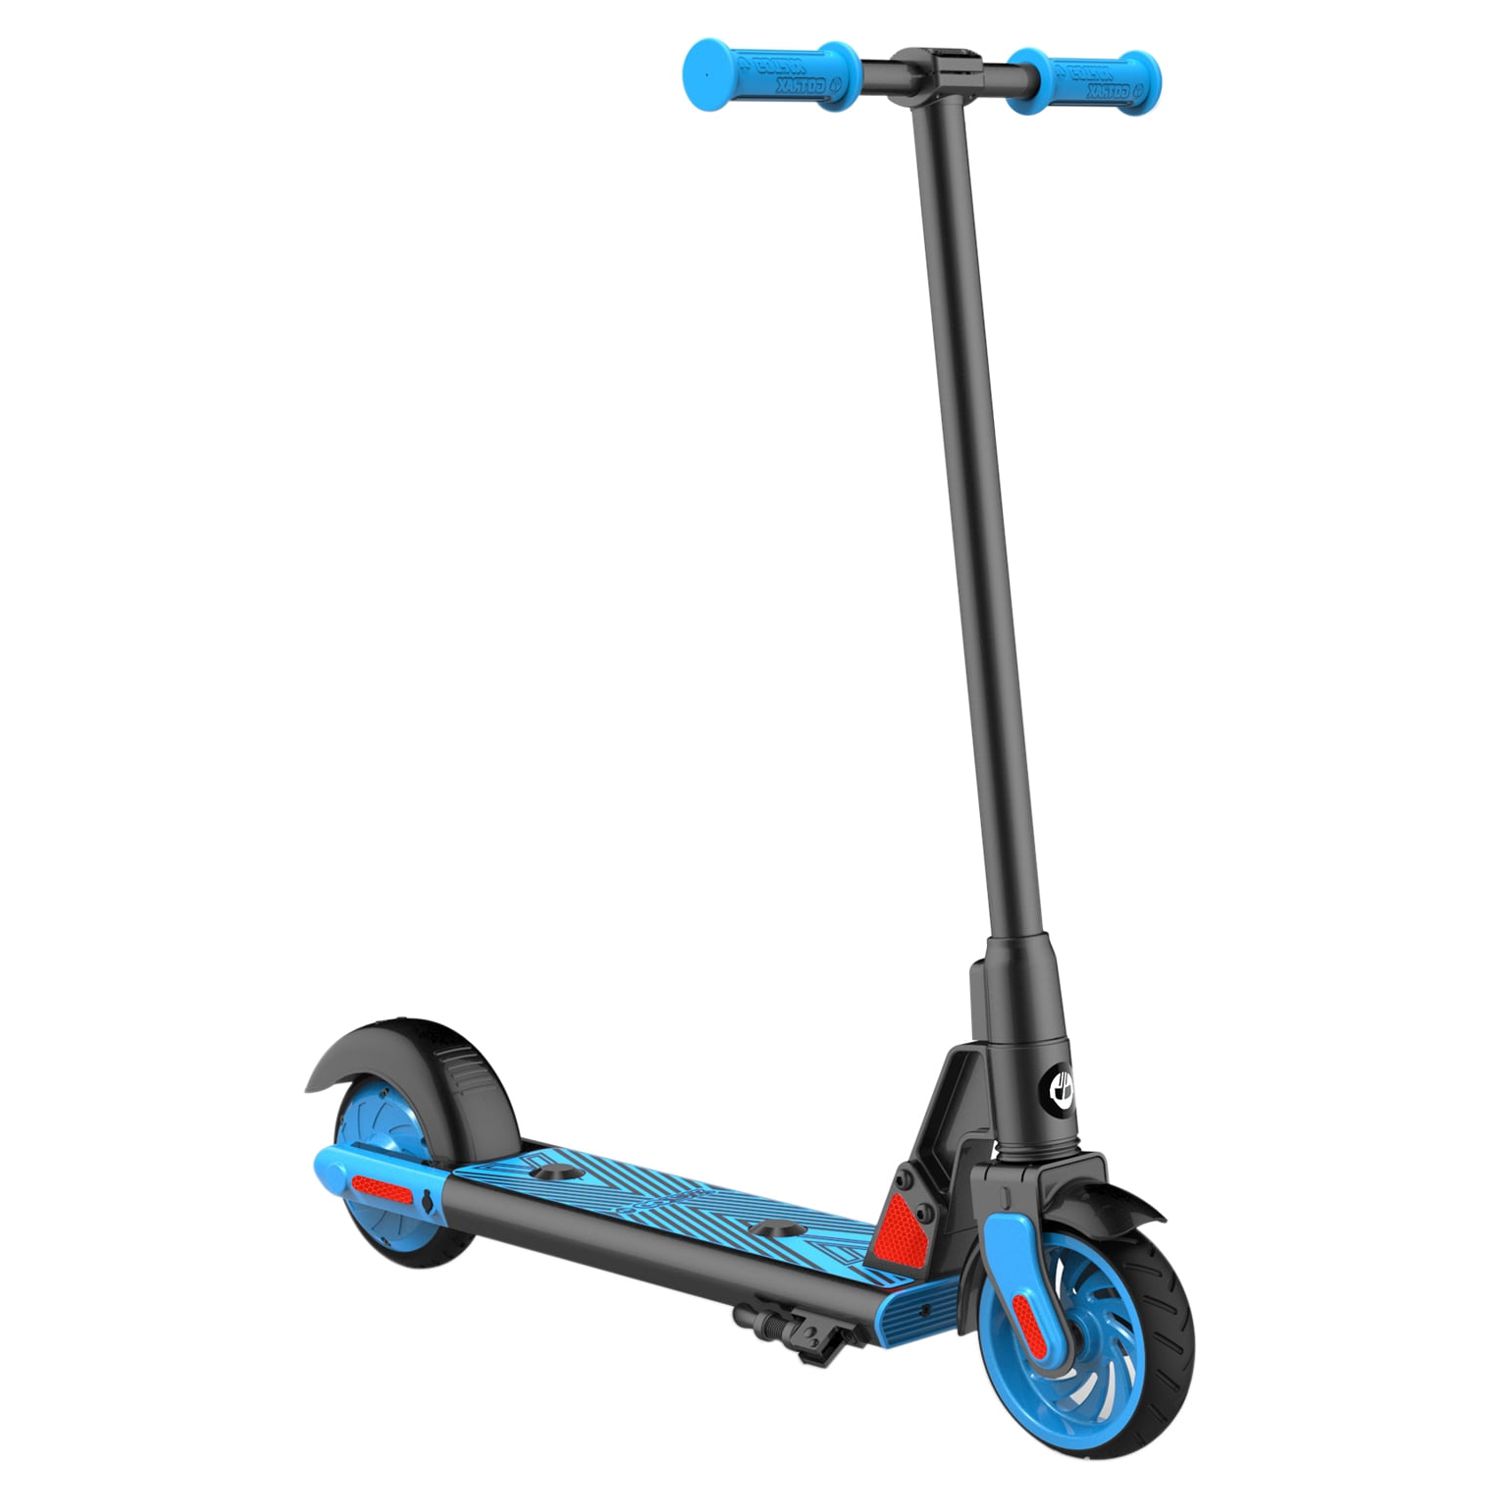 Gotrax GKS Electric Scooter for Kid Ages 6-12, 6" Wheels Lightweight Electric Kick Scooter for Kid, Blue - image 3 of 11